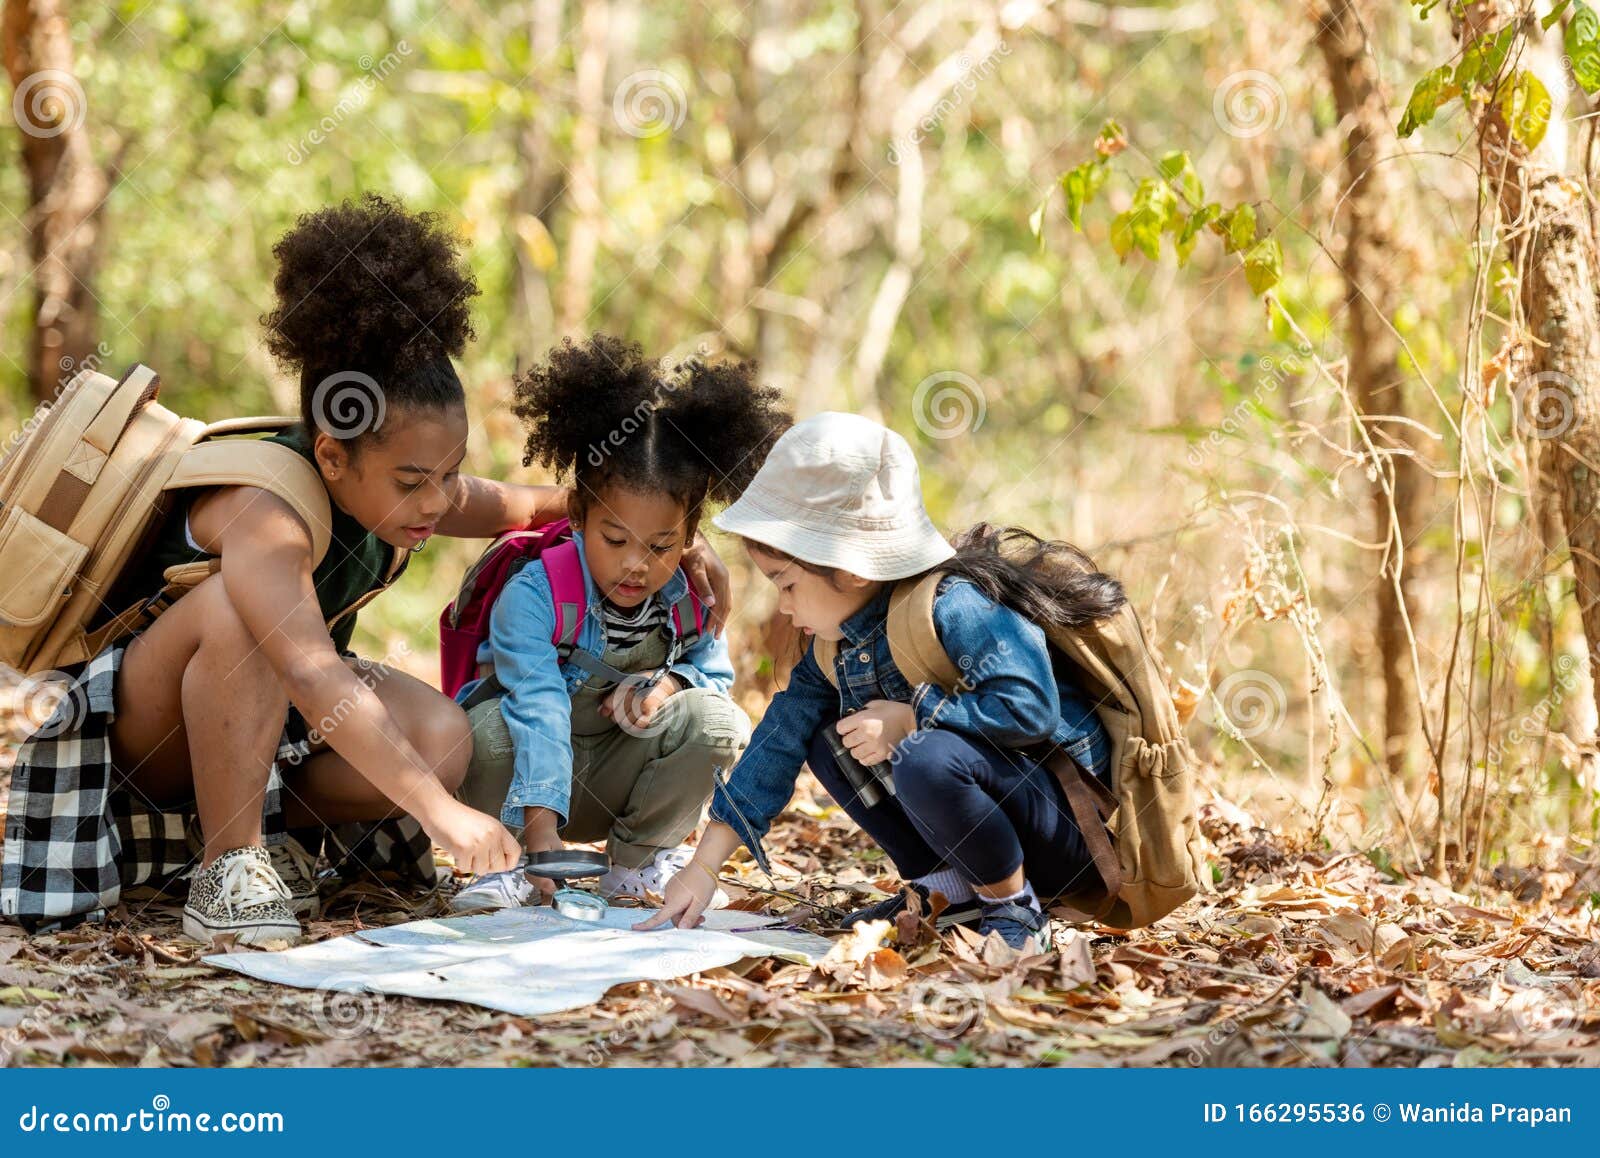 group family children checking map for explore and find directions in the camping jungle nature and adventure